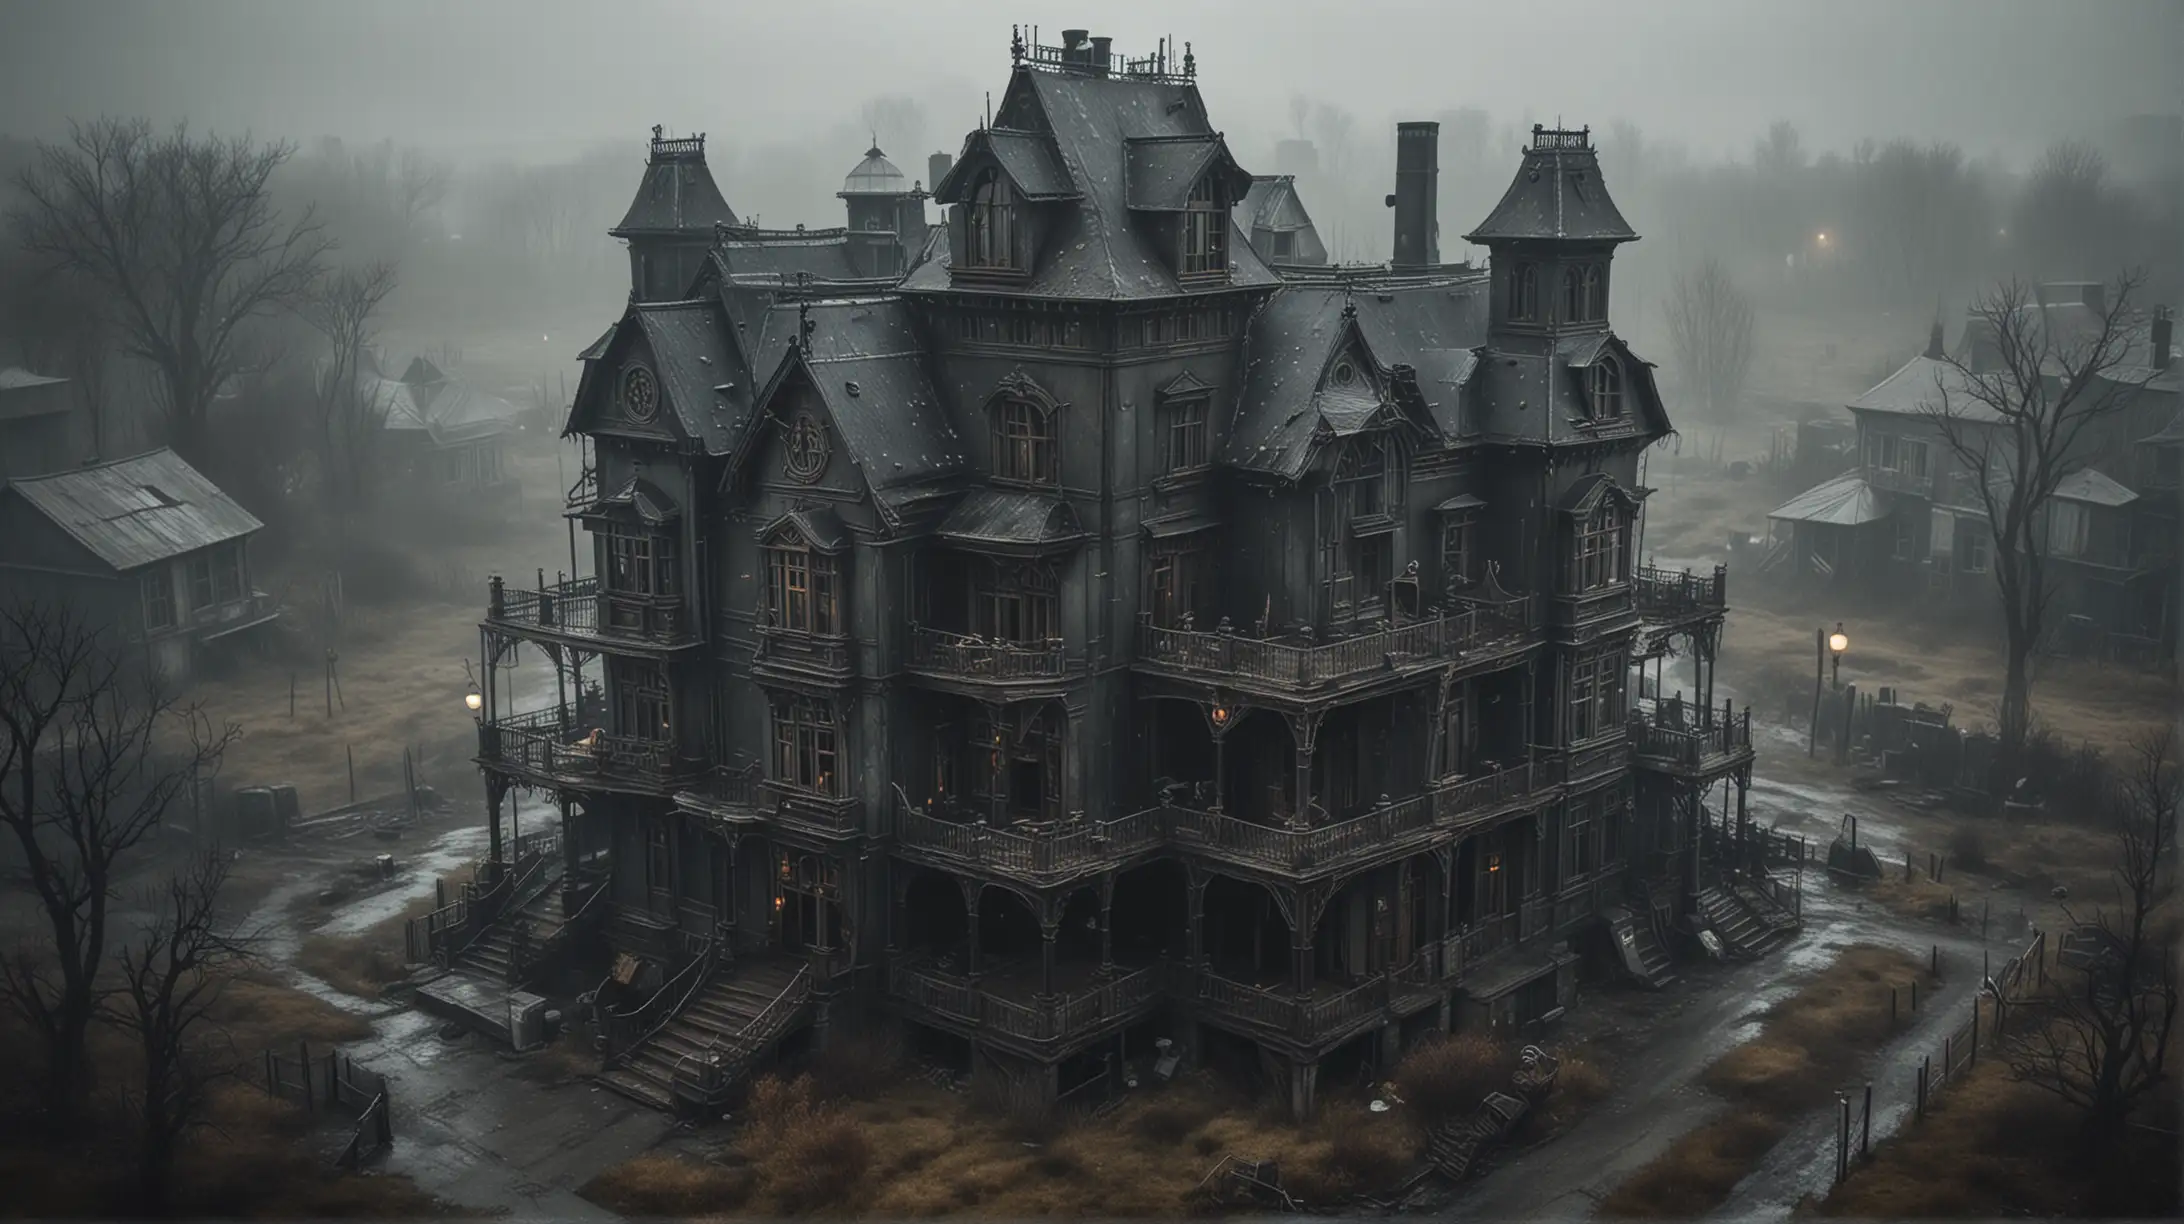 Desolate Steampunk Manor House Shrouded in Darkness Aerial View Amidst Rain and Fog